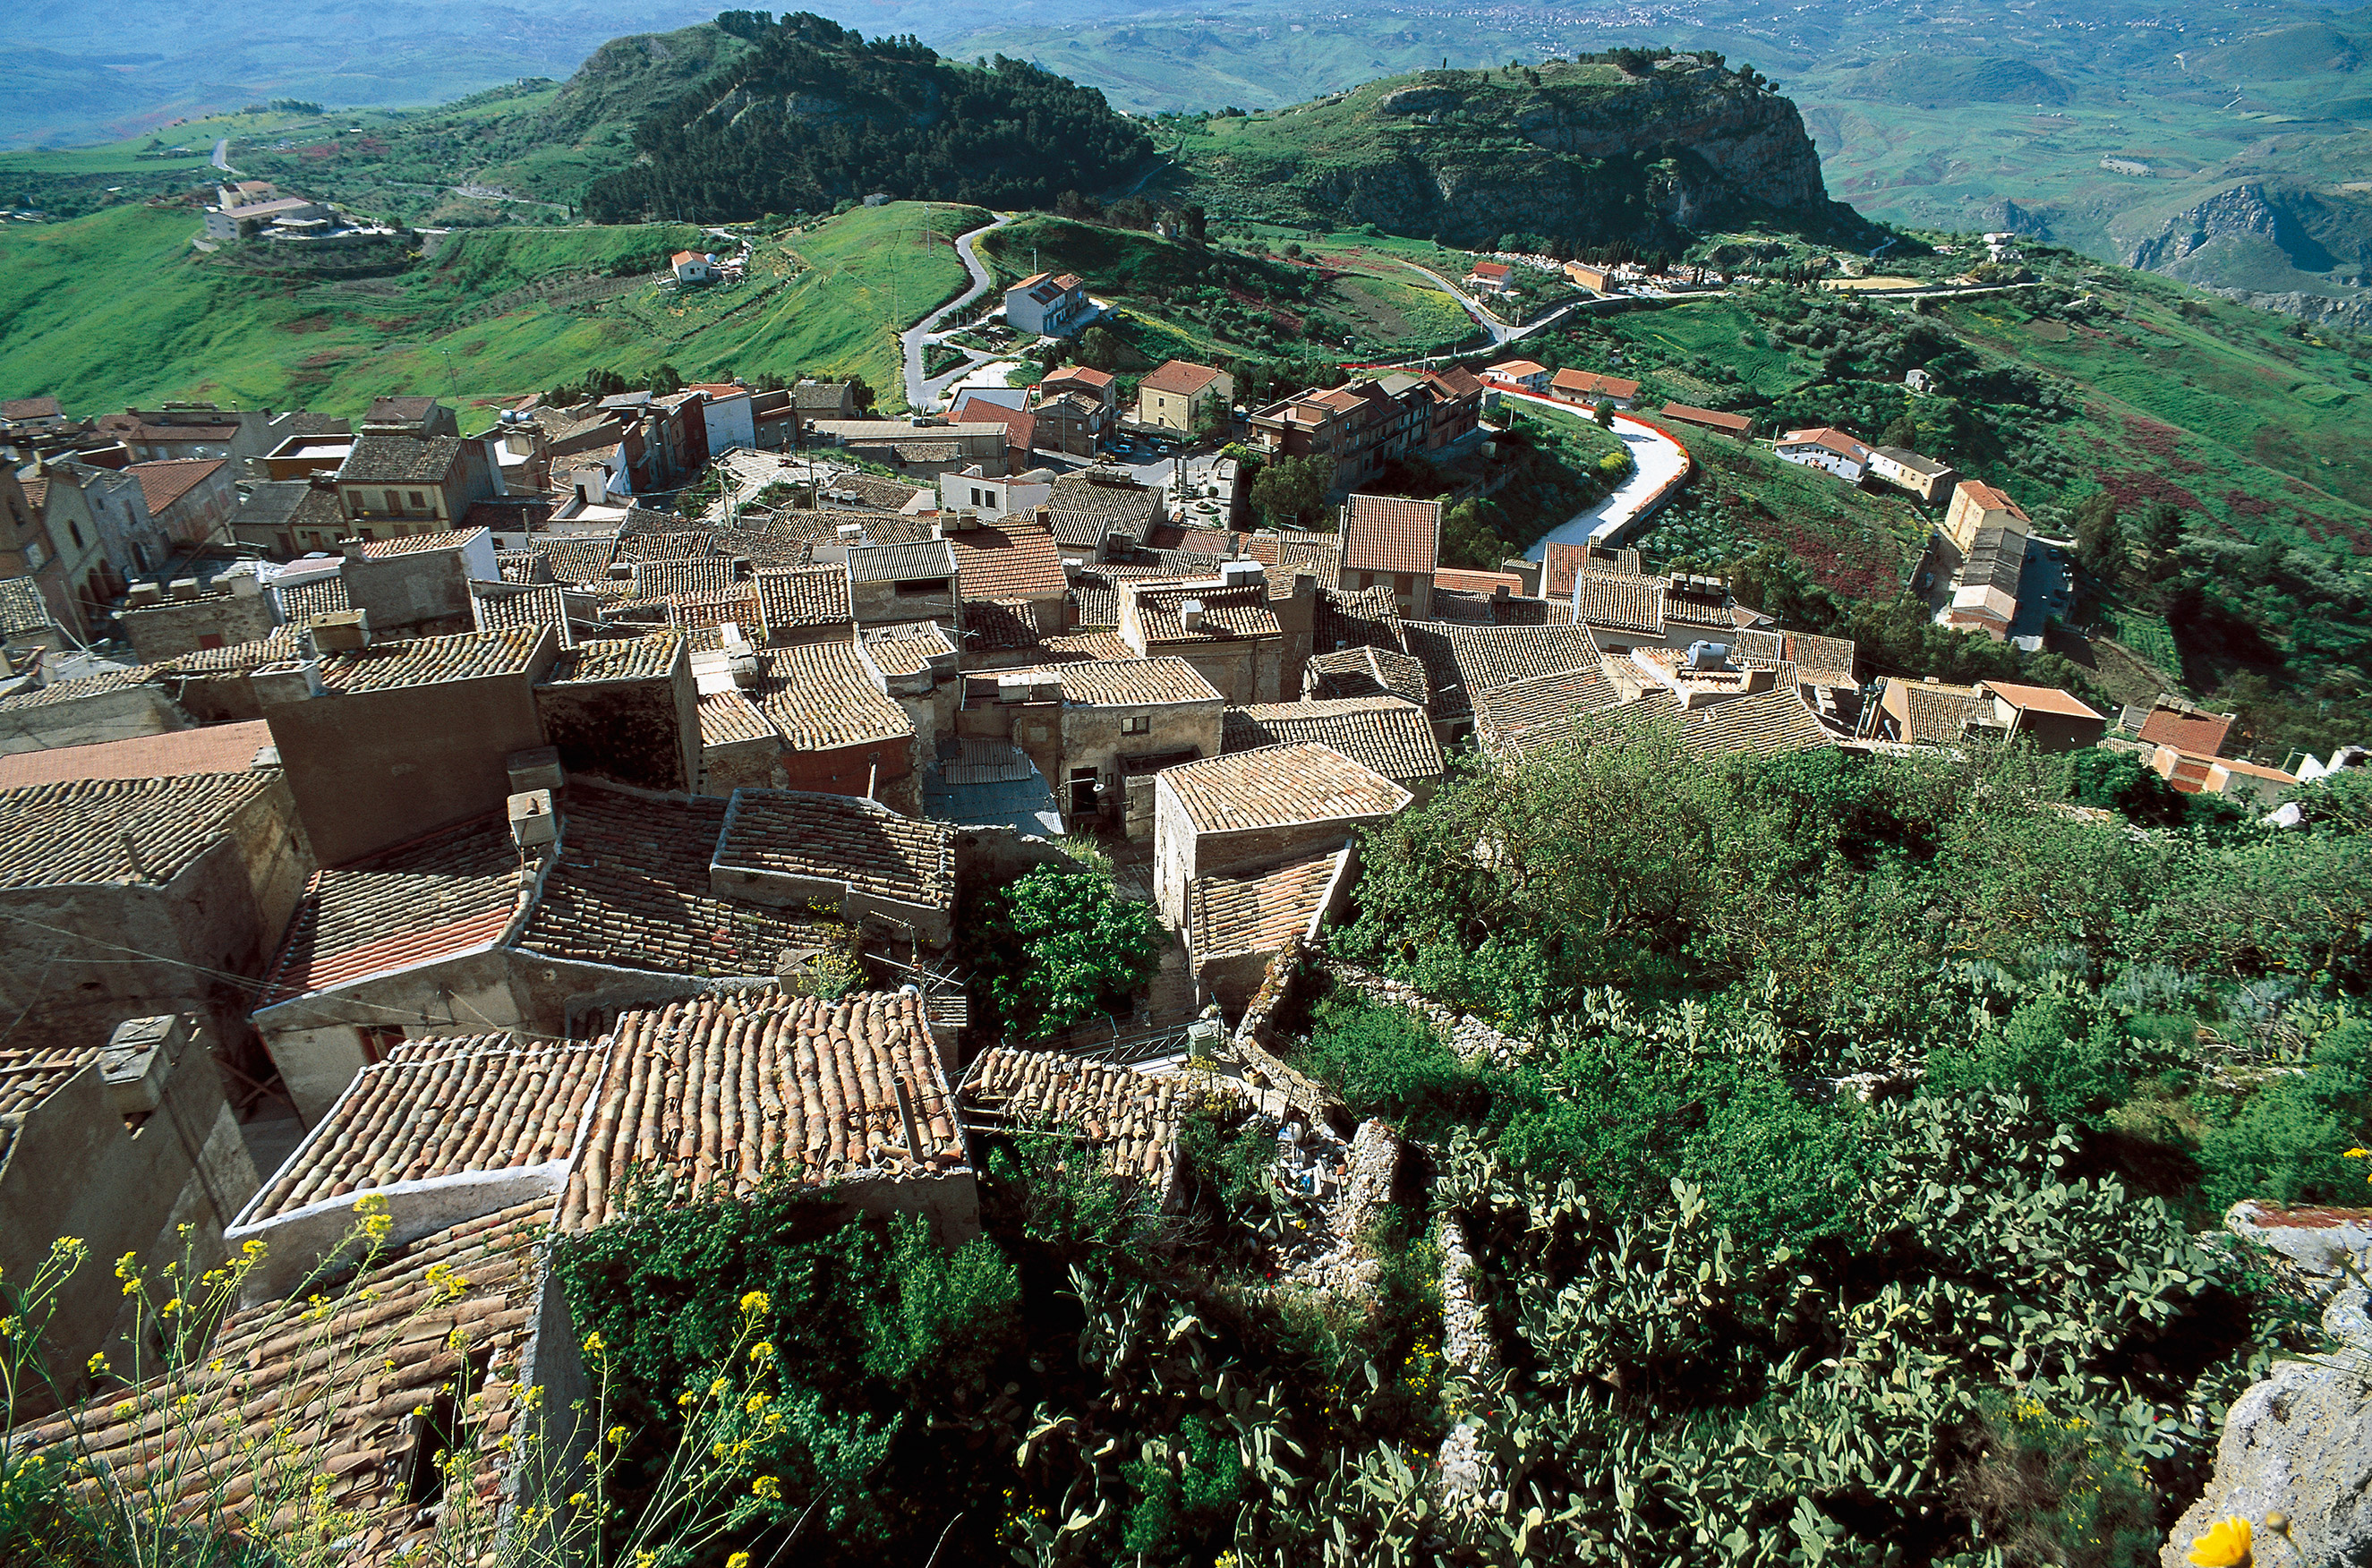 An overhead view of the village of Sutera, Sicily, Italy, on July 23, 2007. (R. Carnovalini—De Agostini/Getty Images)